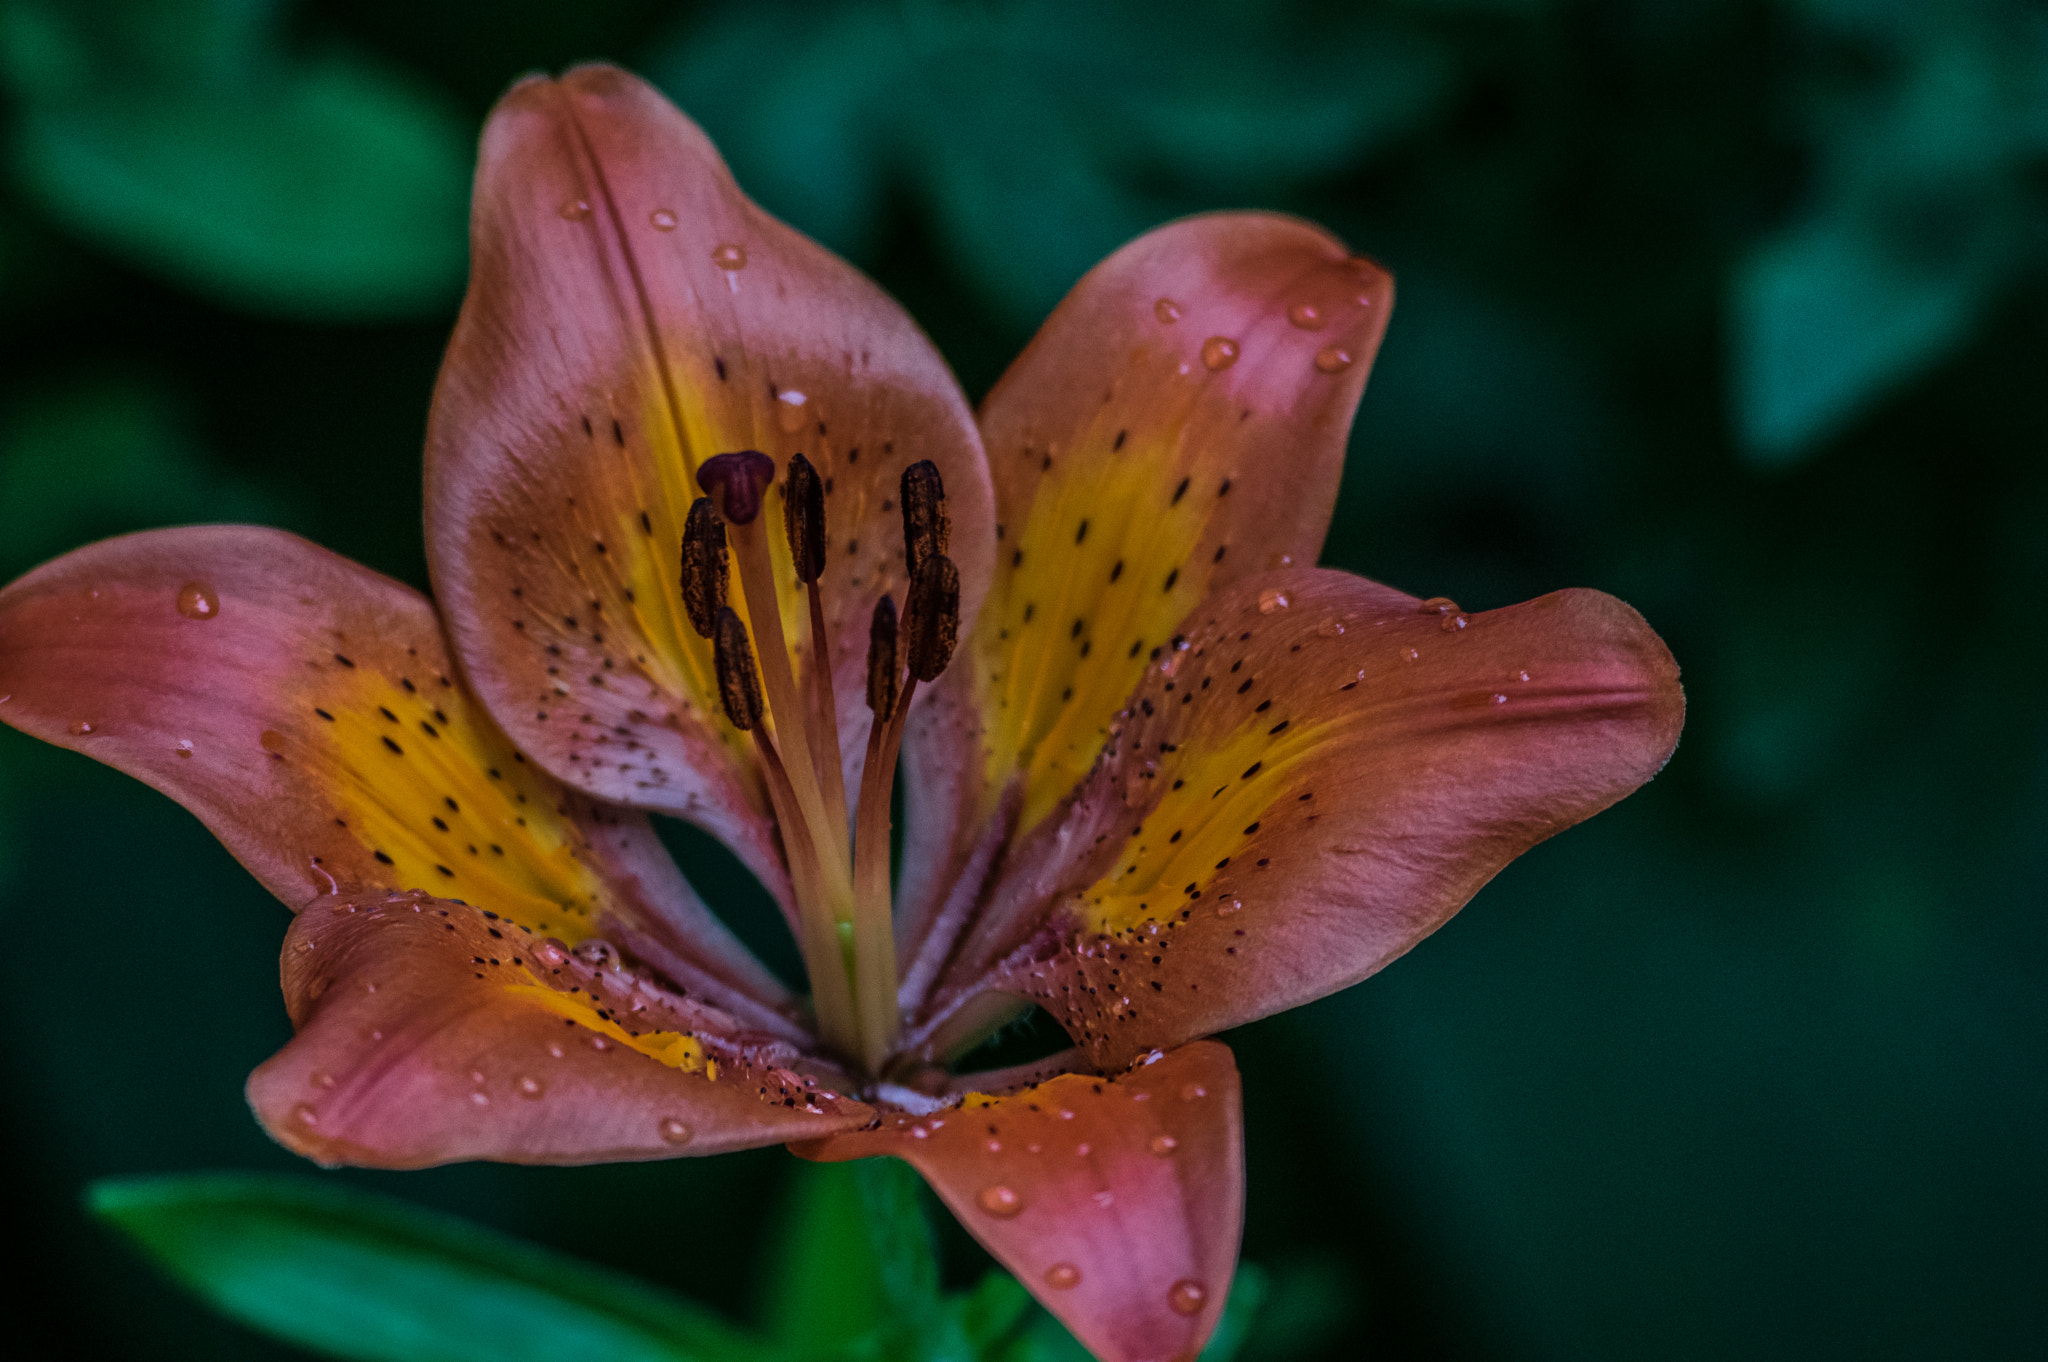 Pentax K-3 II sample photo. Vibrant lilly photography